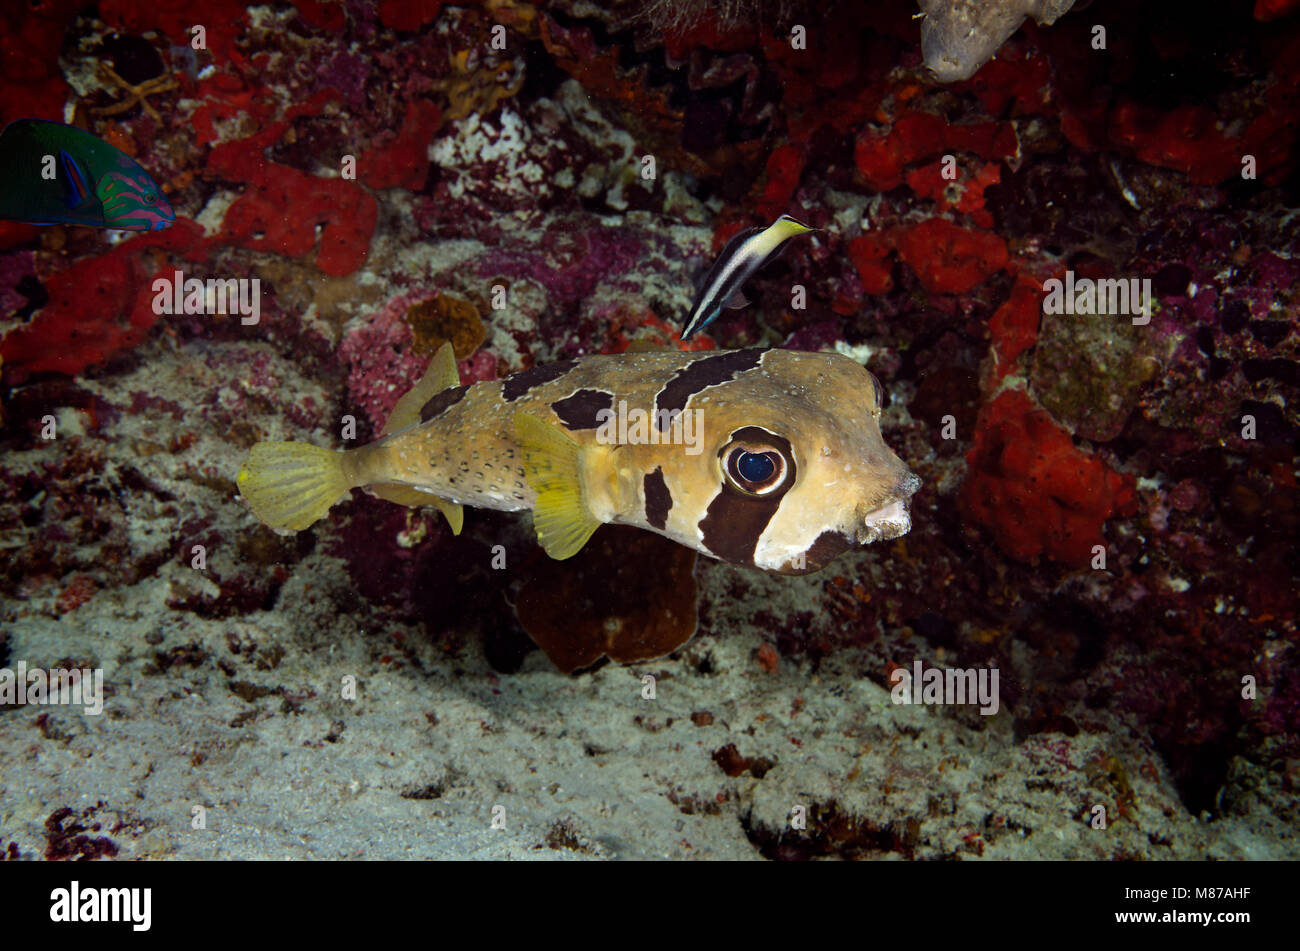 Blotched Porcupinefish, Diodon liturosus, with cleaner wrasse, Labroides dimidiatus, on coral reef in Bathala, Maldives, Stock Photo